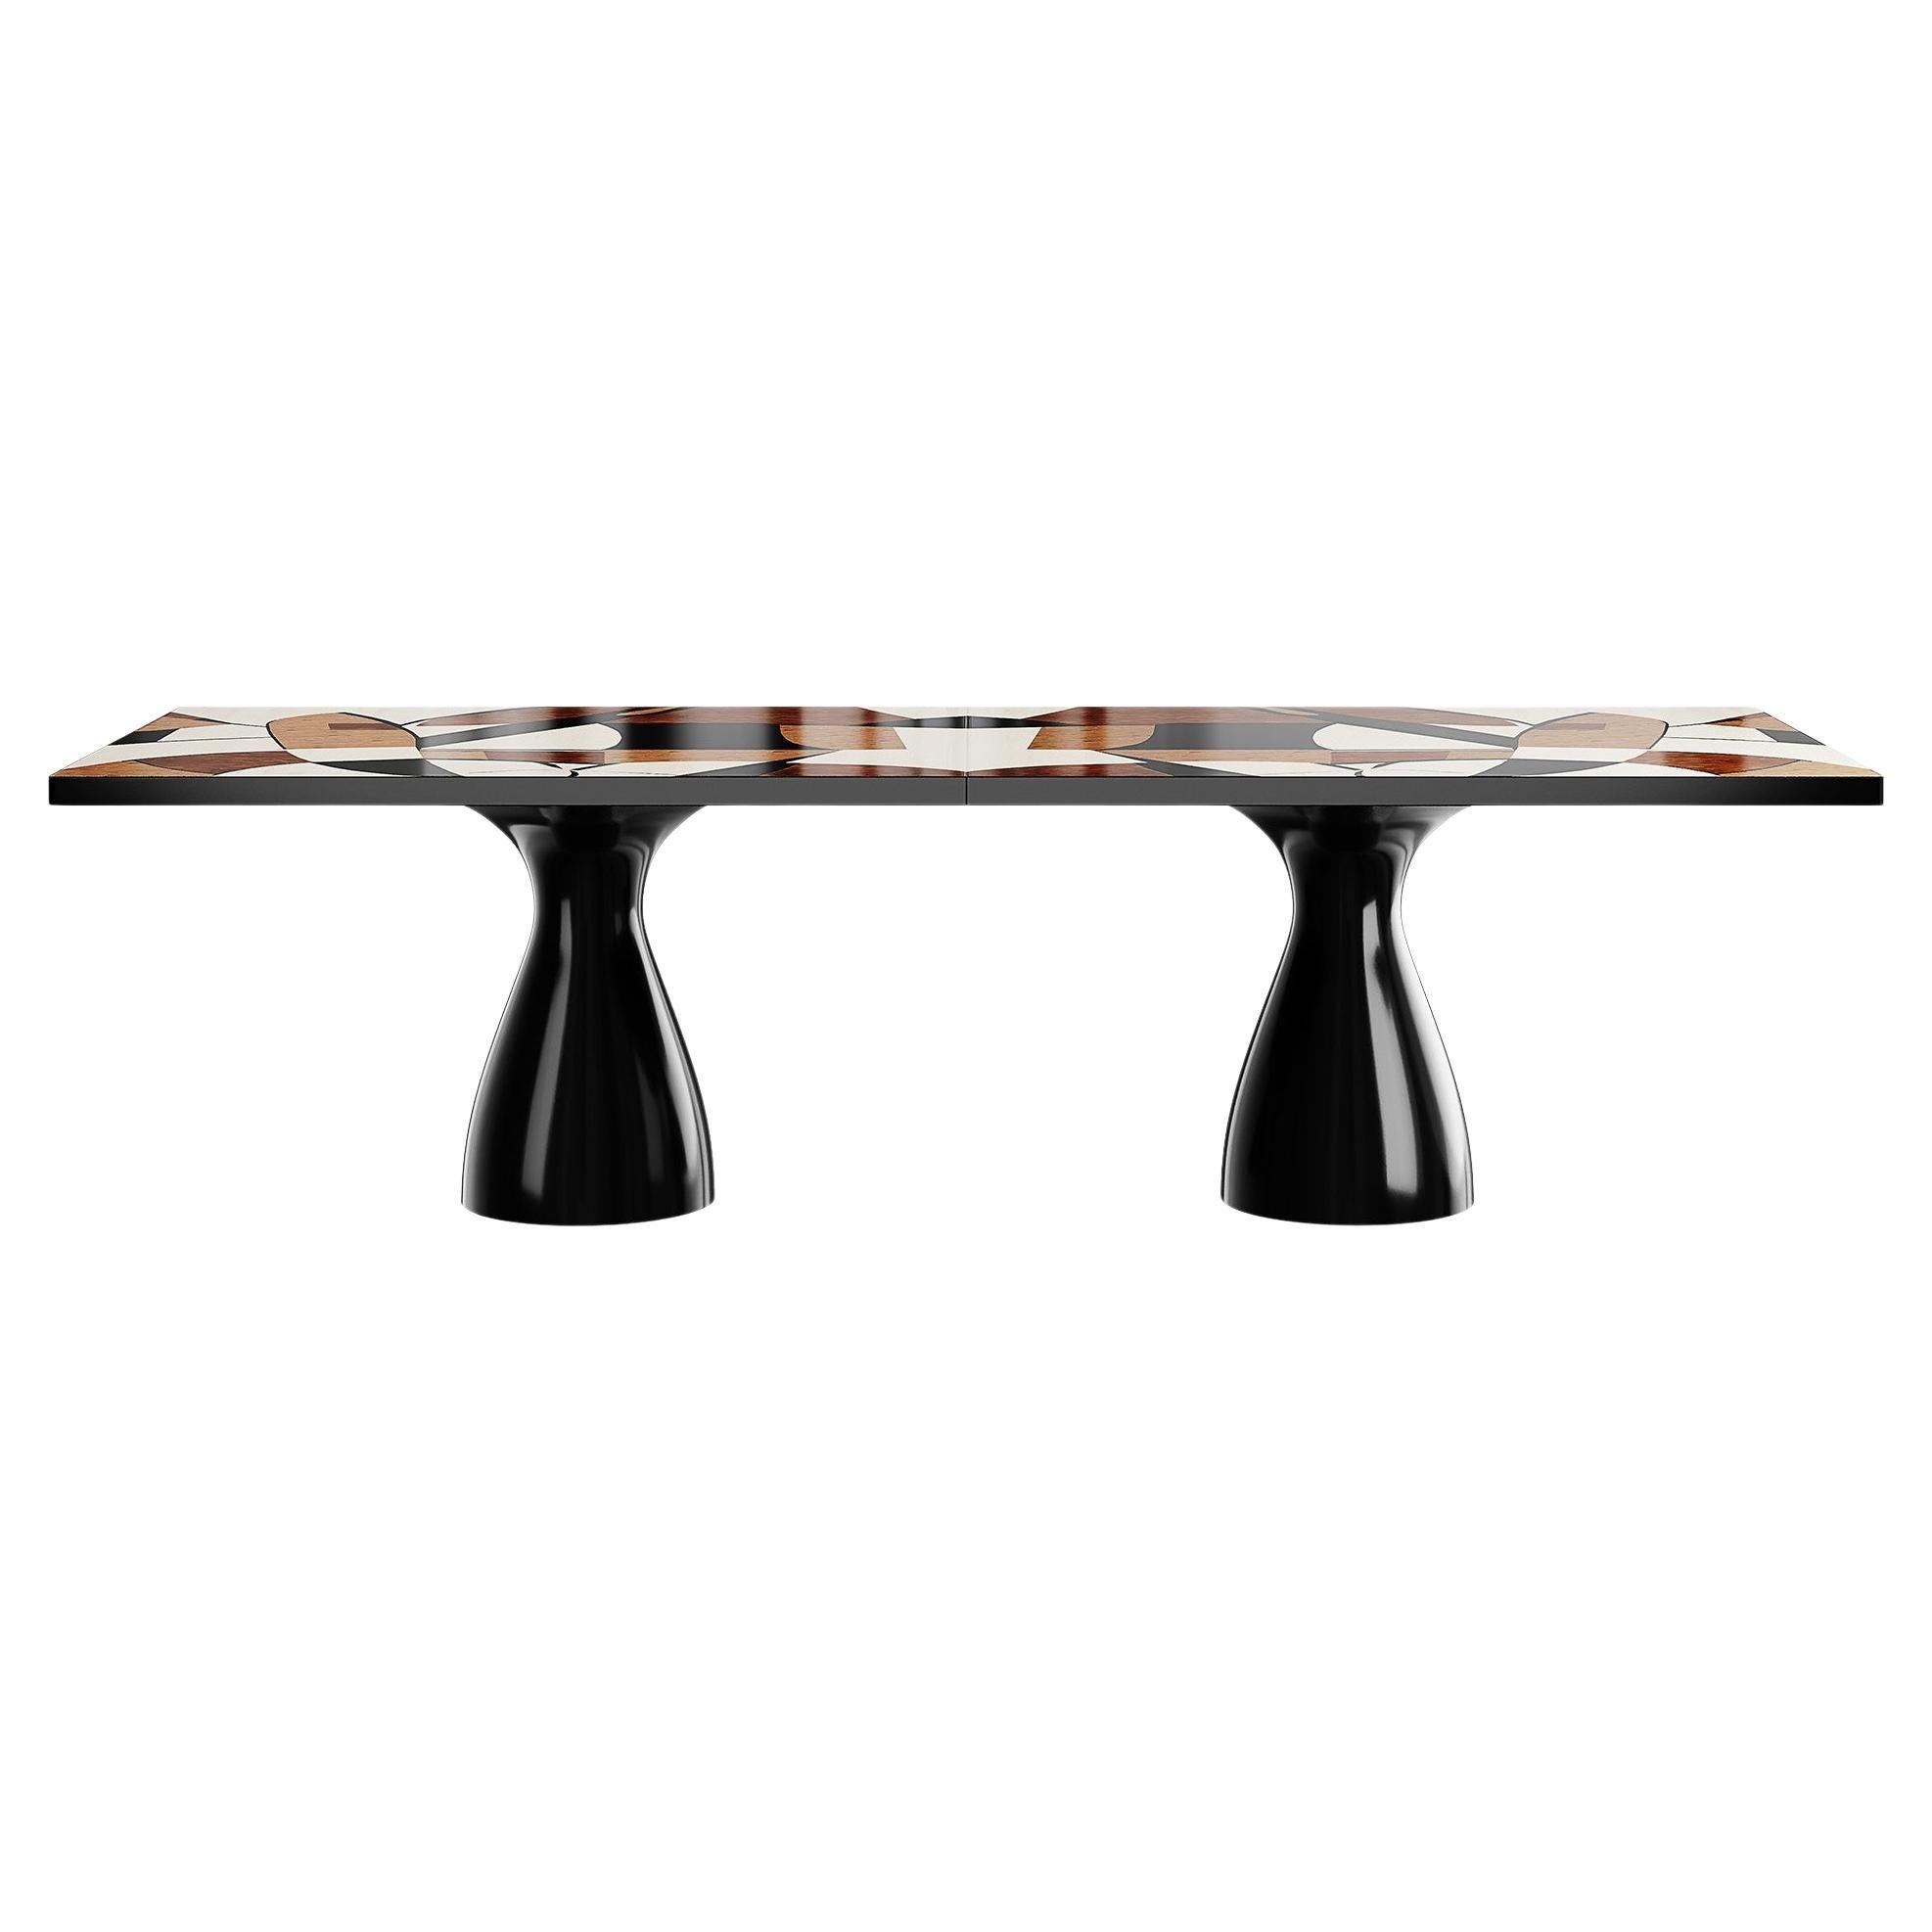 Hommes Studio Dining Room Tables